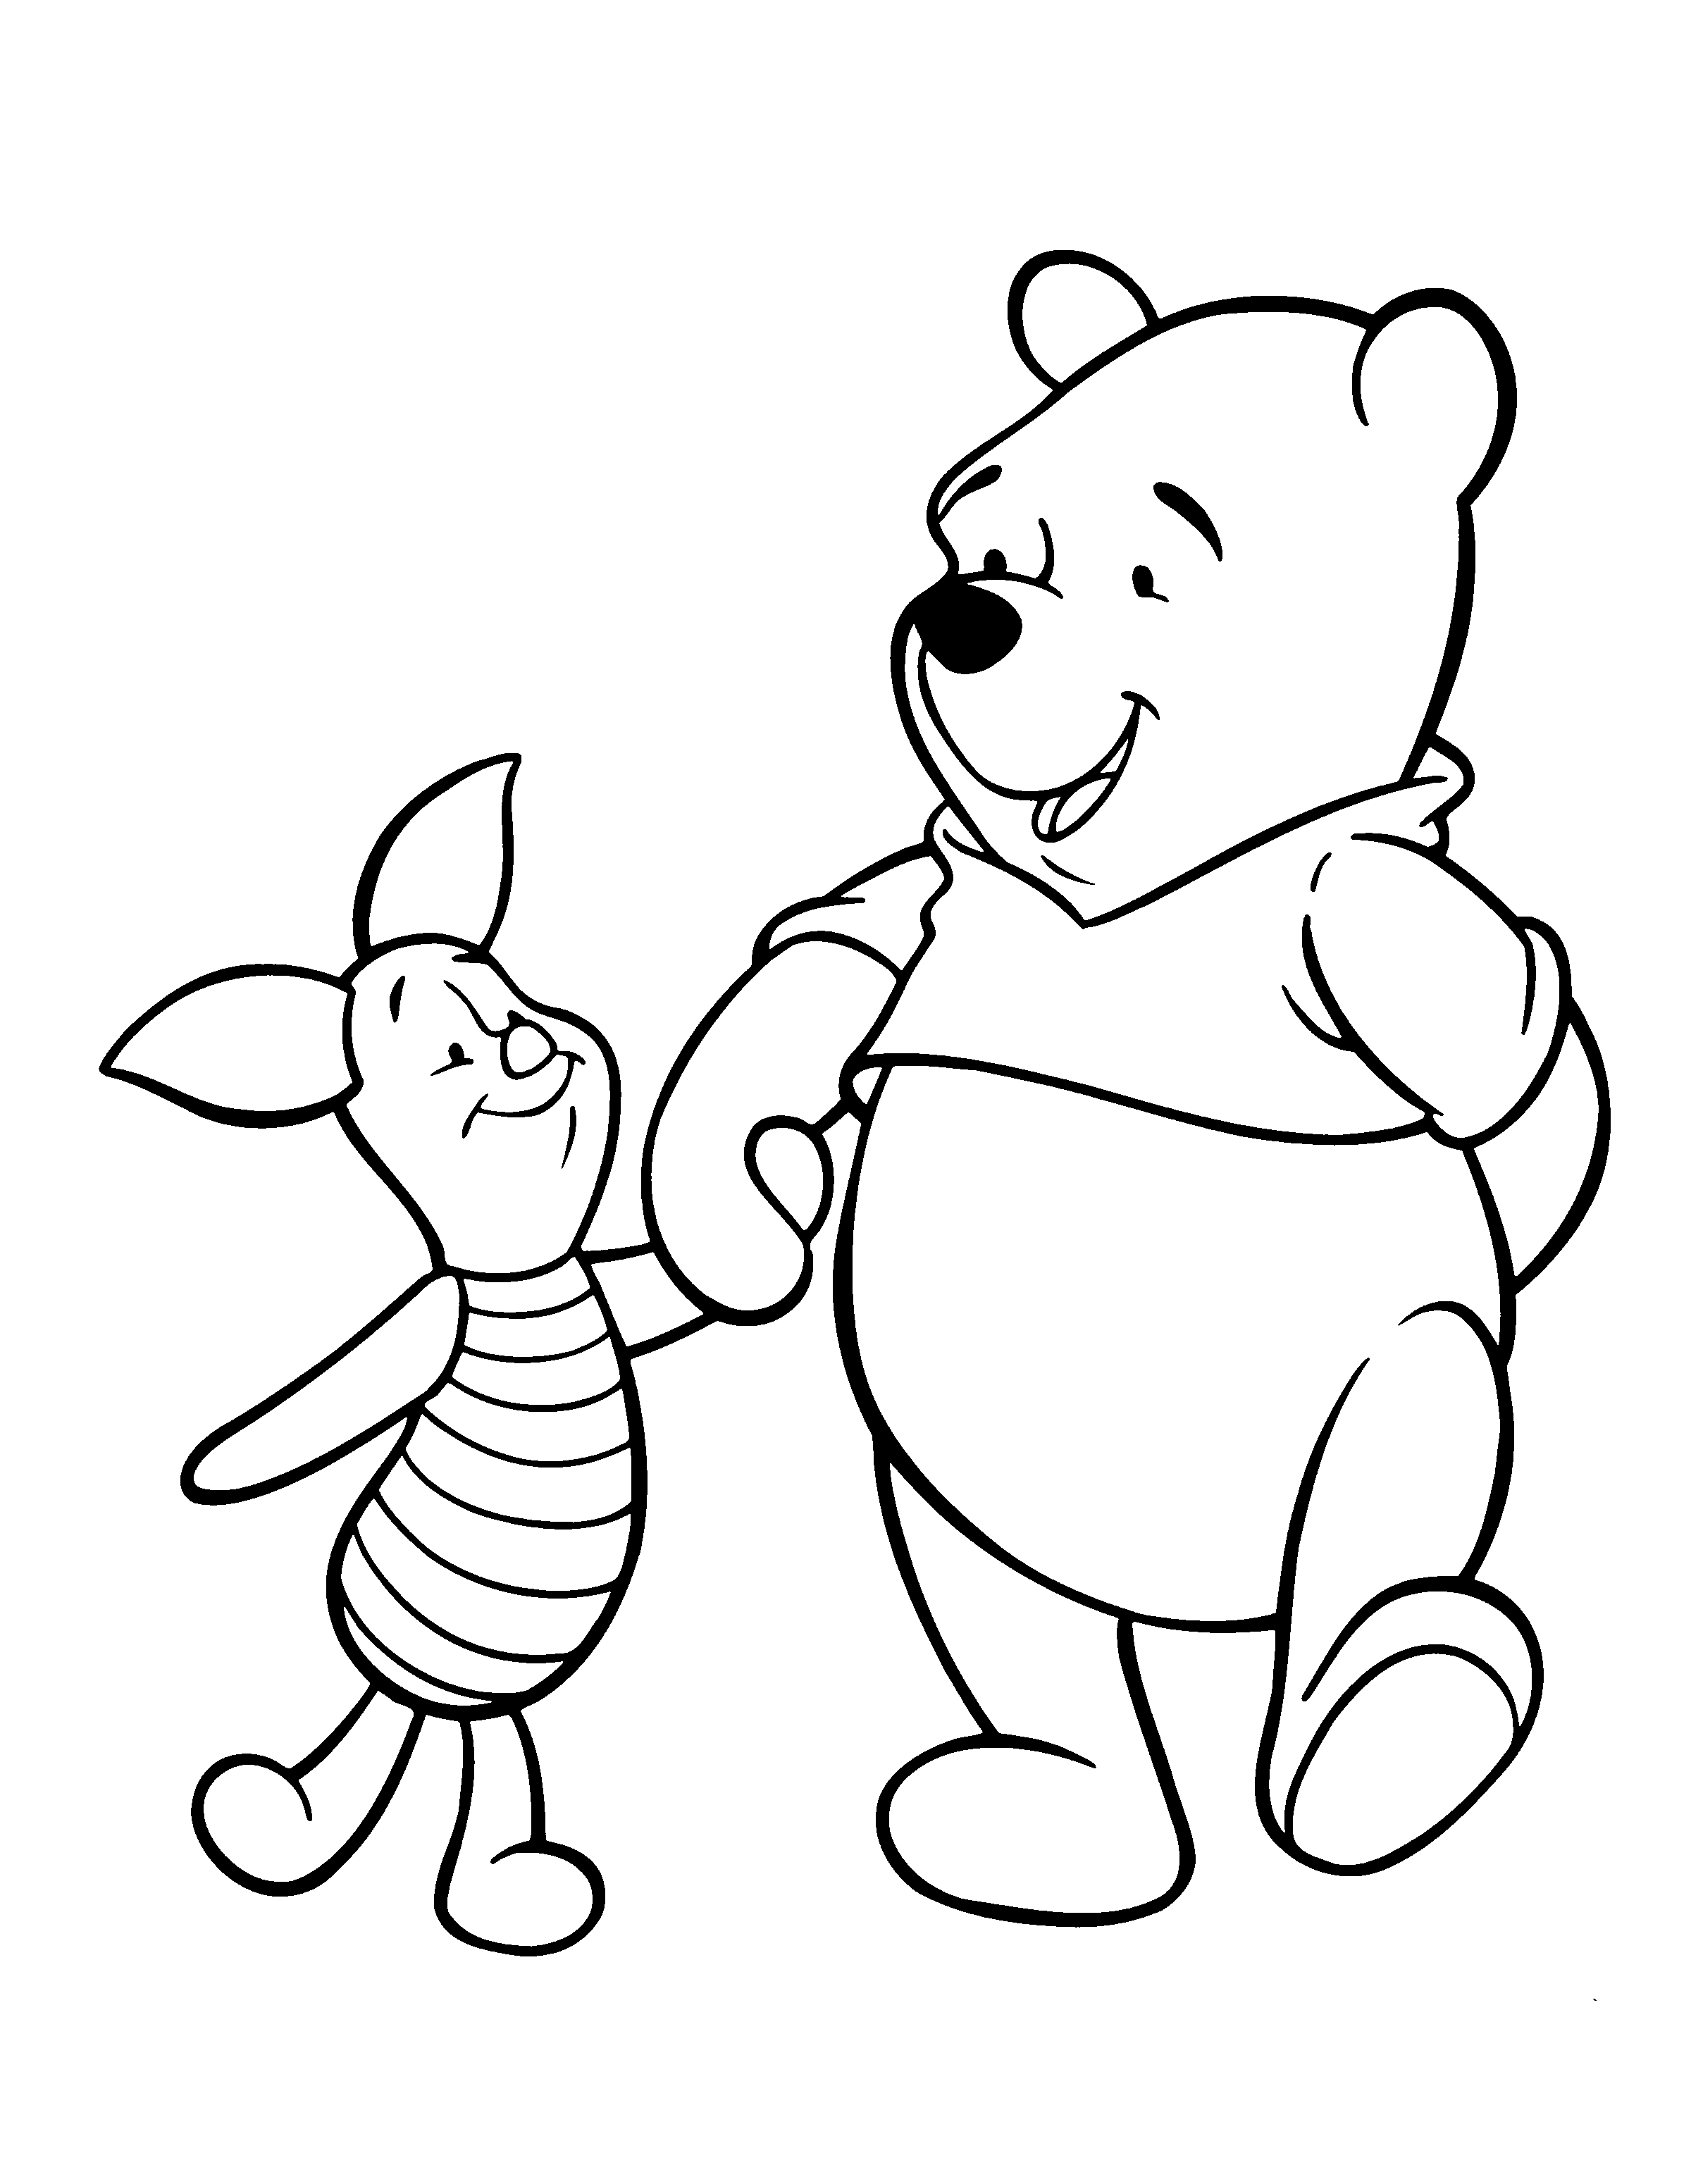 Winnie the pooh pages â printable pages